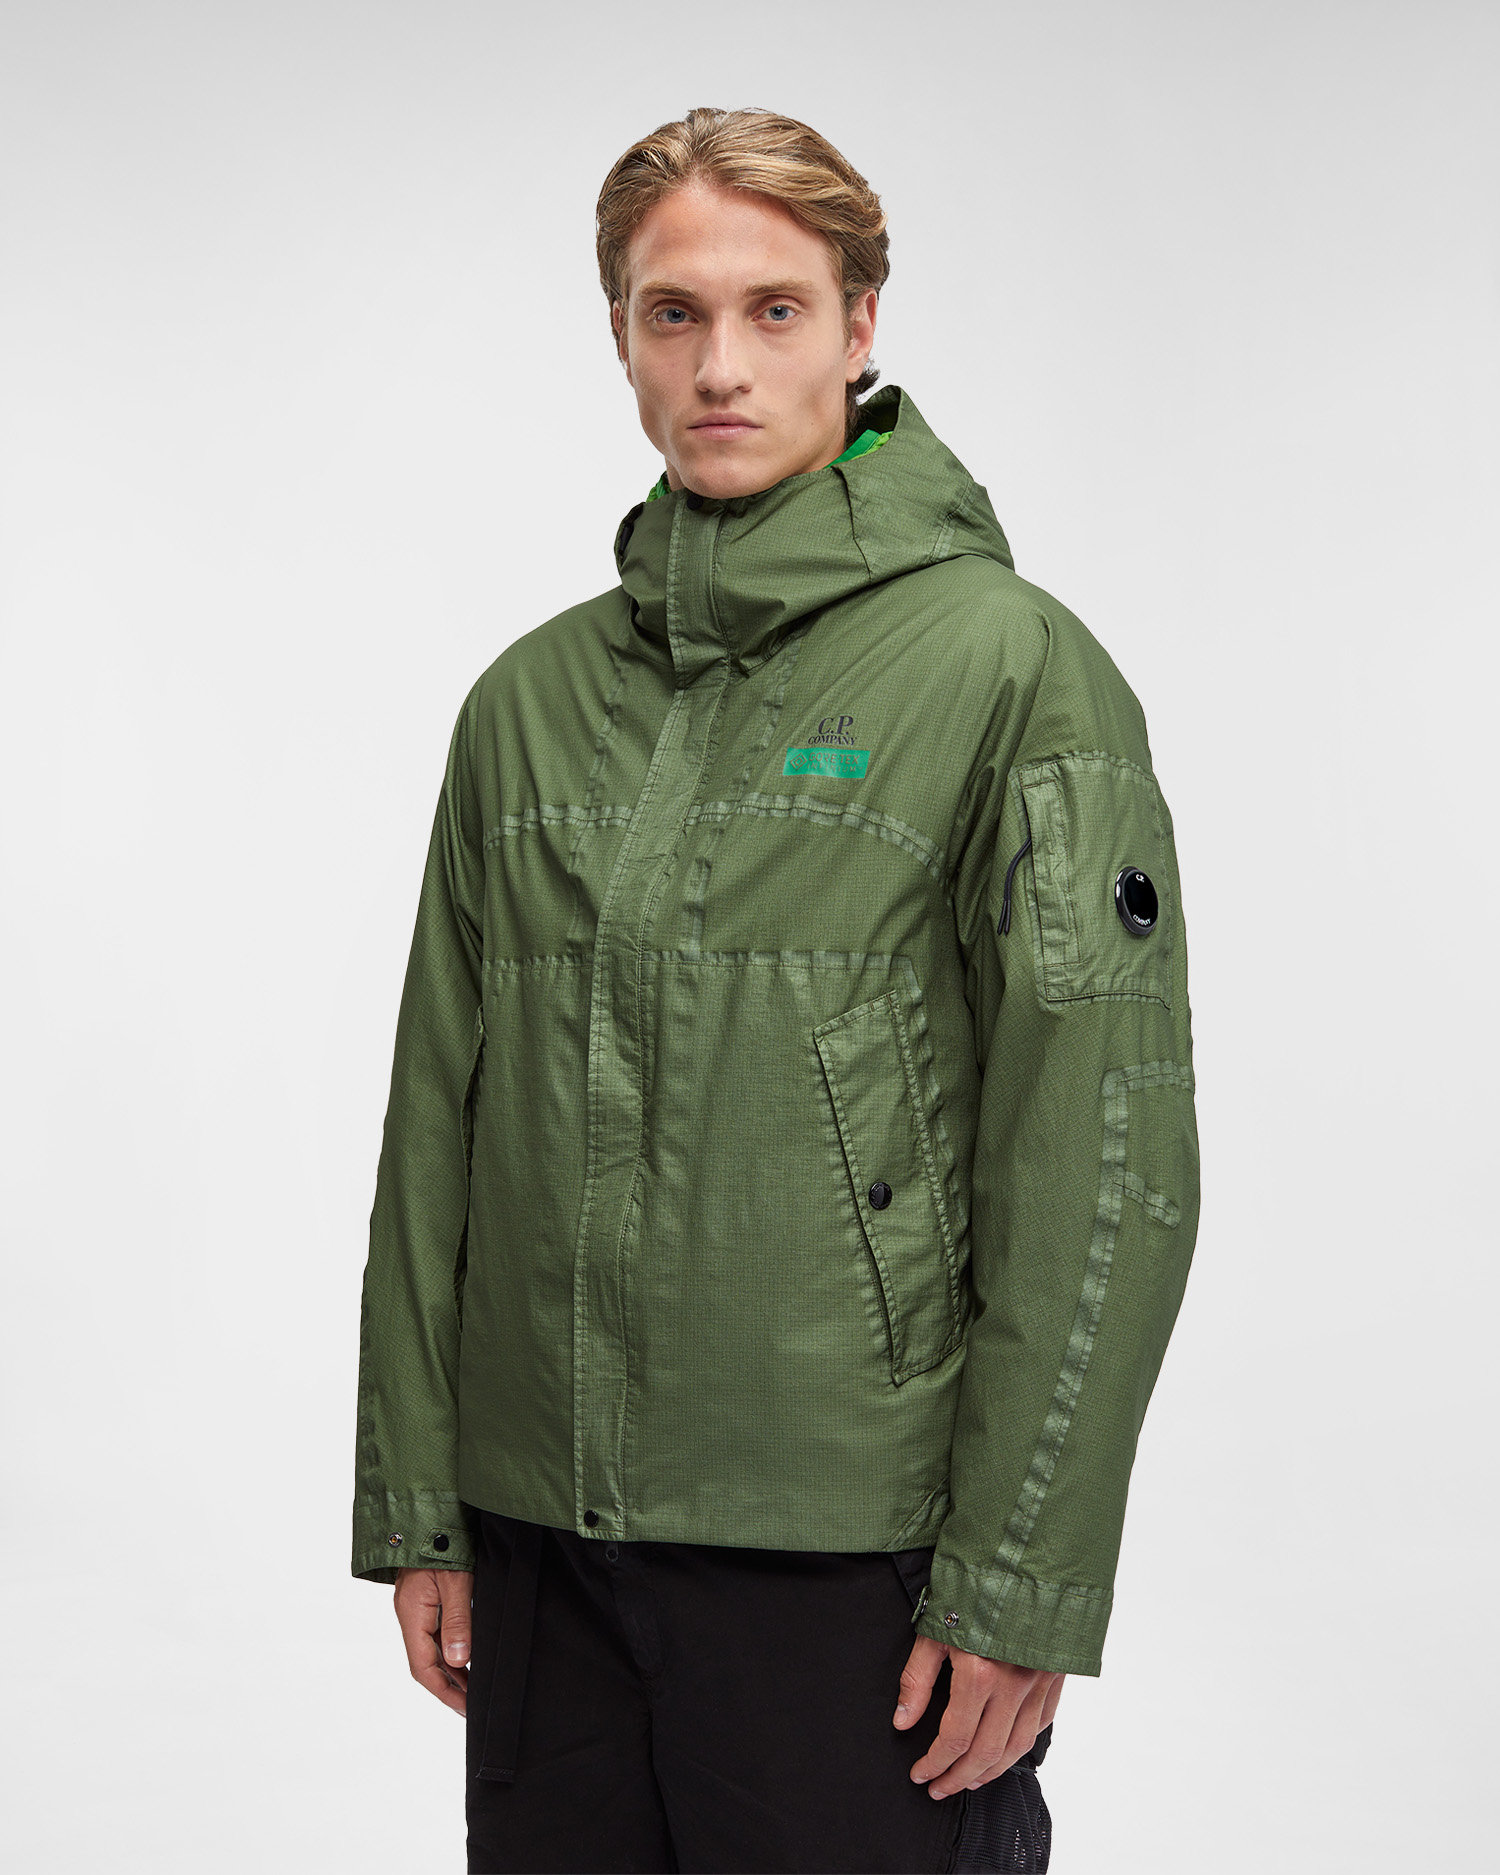 Gore G-type Hooded Jacket